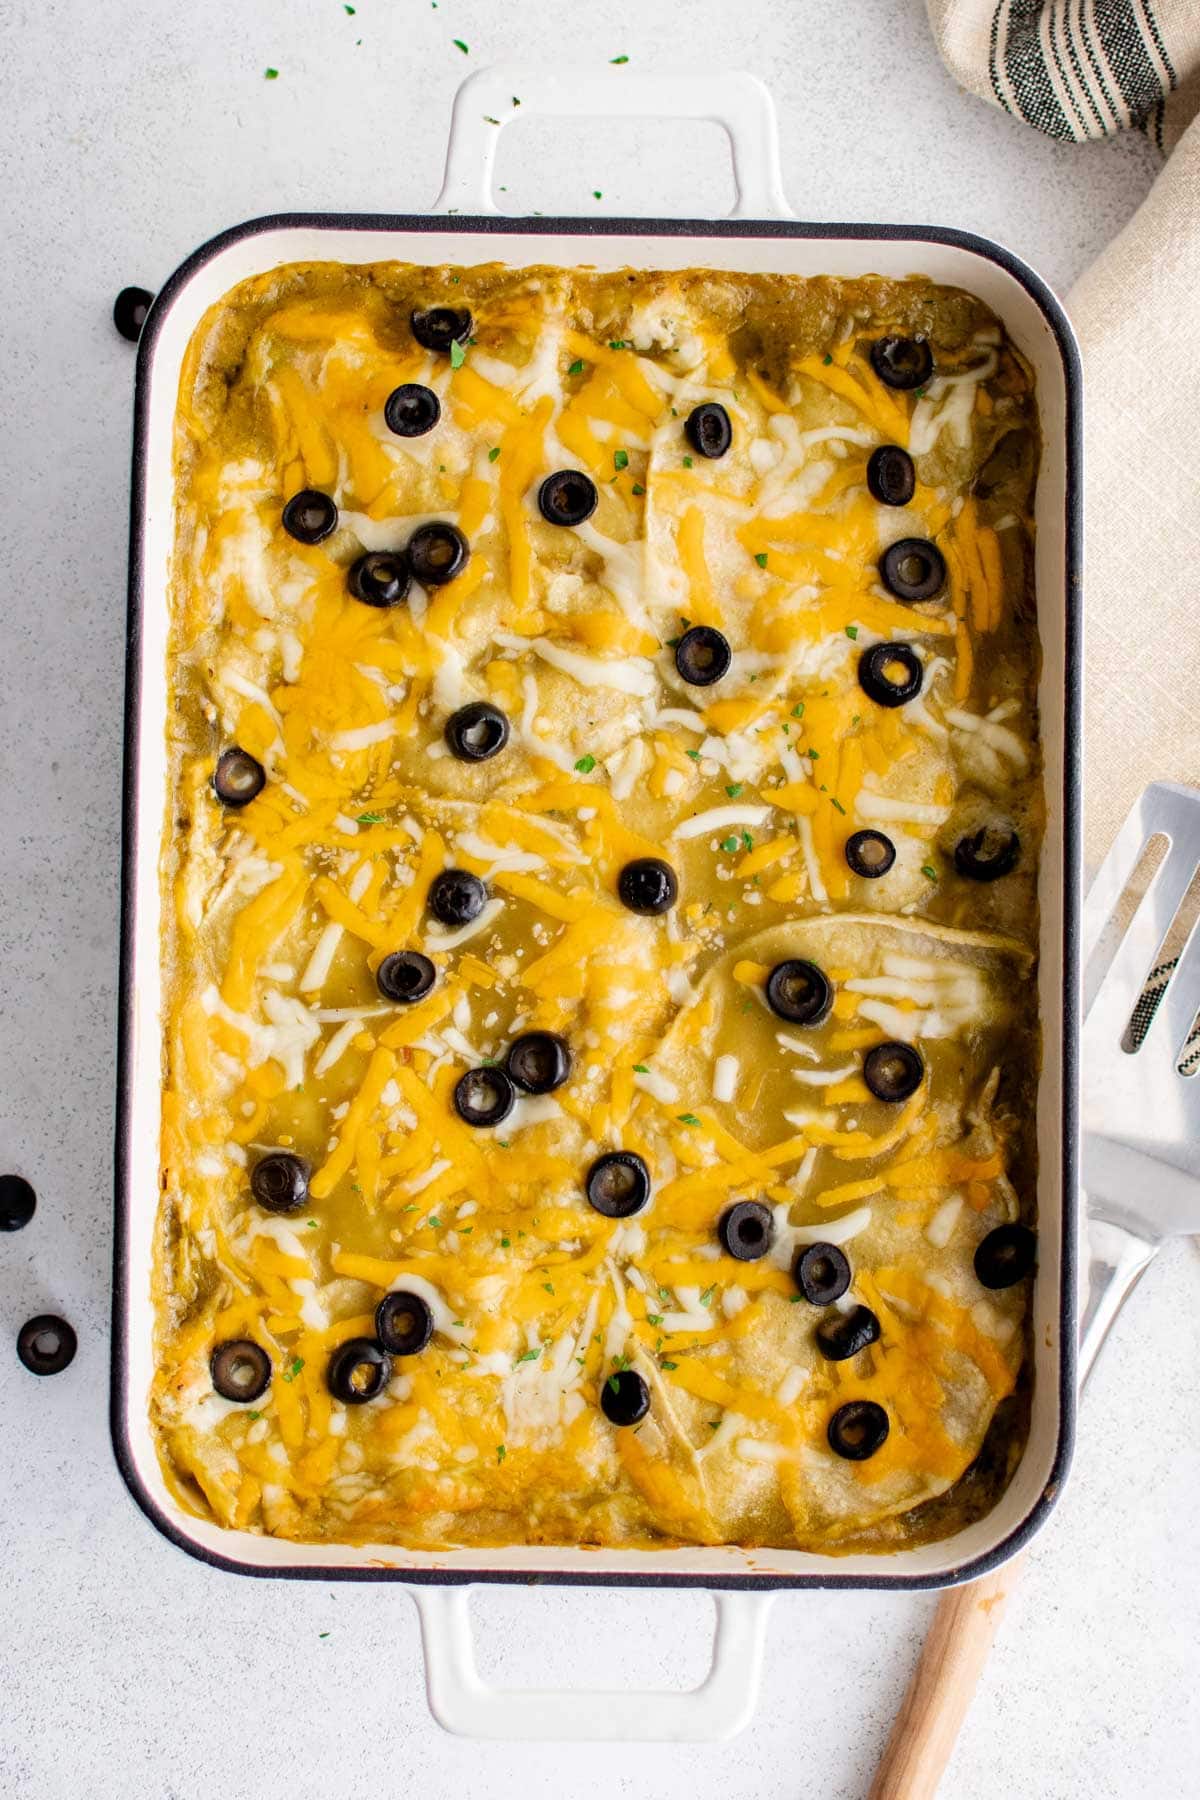 Casserole dish with green sauce, shredded cheese and olives.